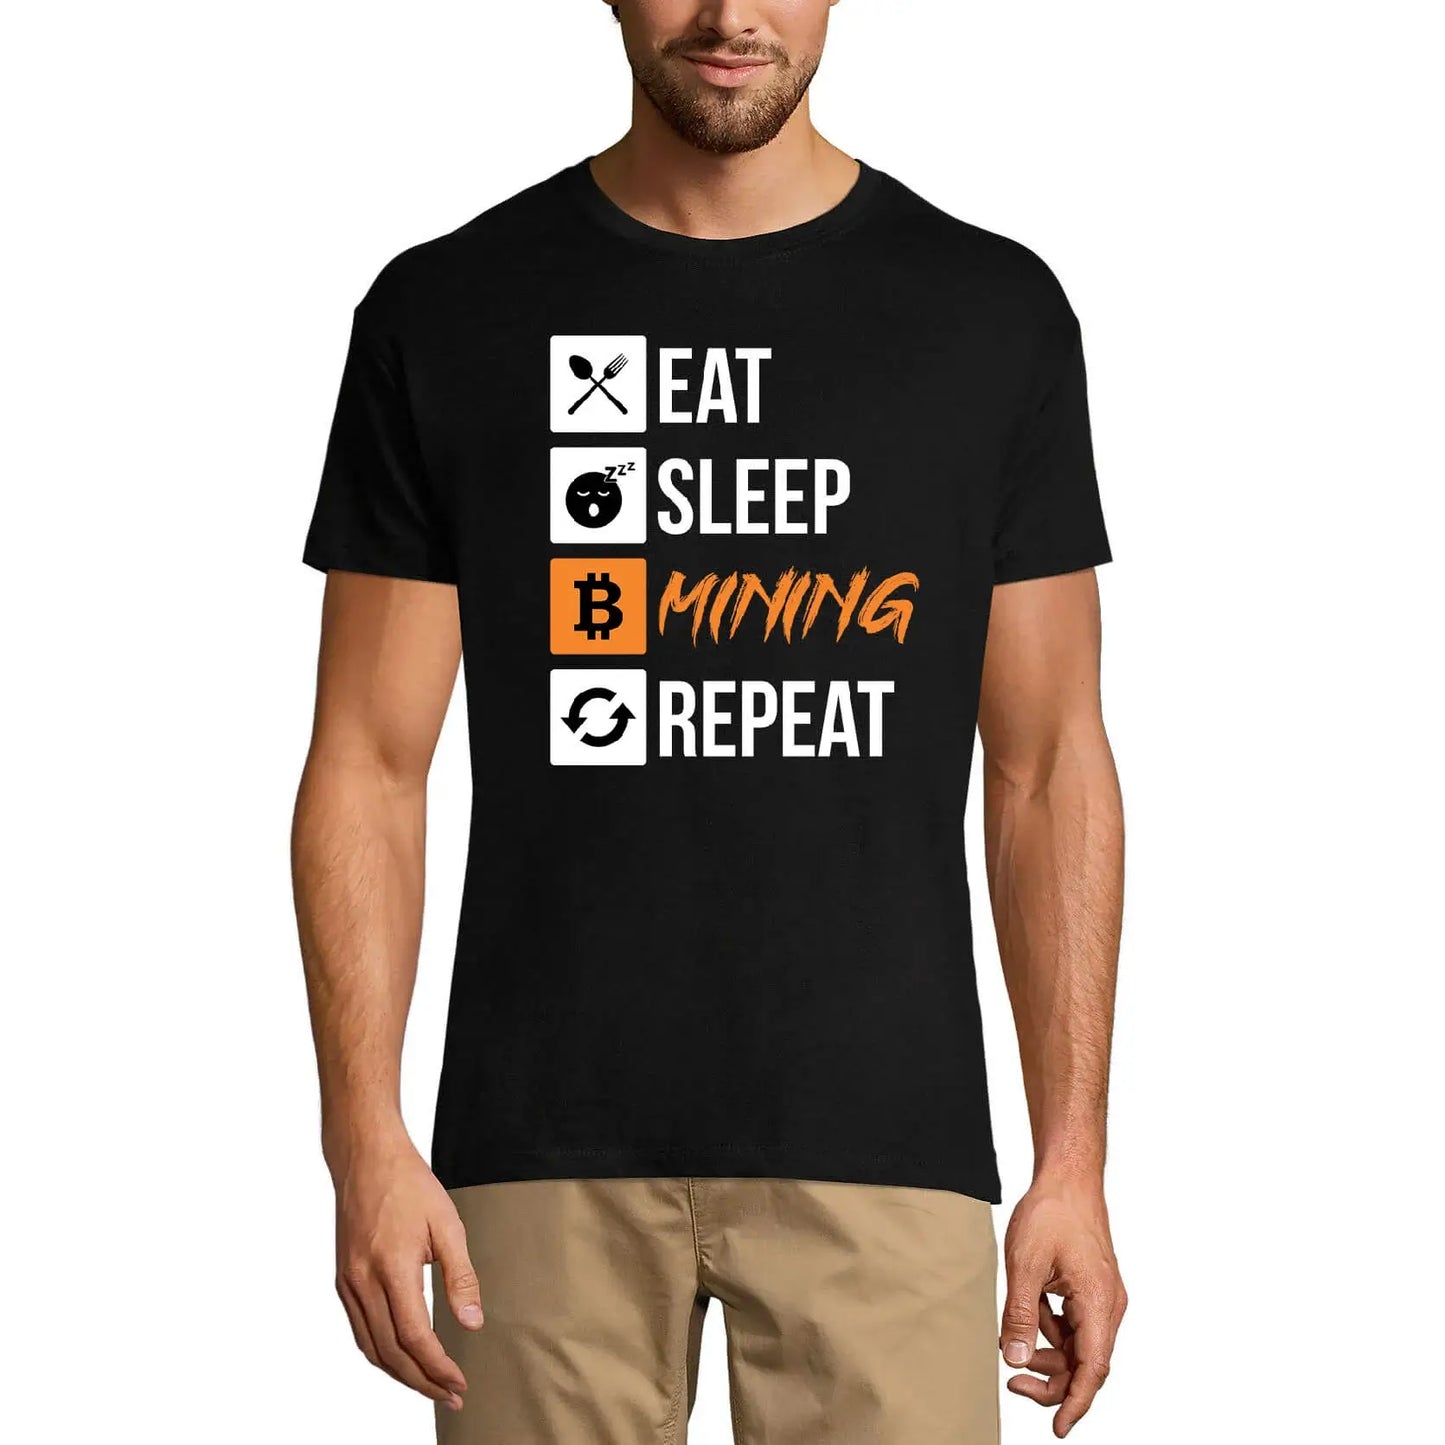 Men's Graphic T-Shirt Eat Sleep Mining Repeat Traders Quote - Cryptocurrency Eco-Friendly Limited Edition Short Sleeve Tee-Shirt Vintage Birthday Gift Novelty